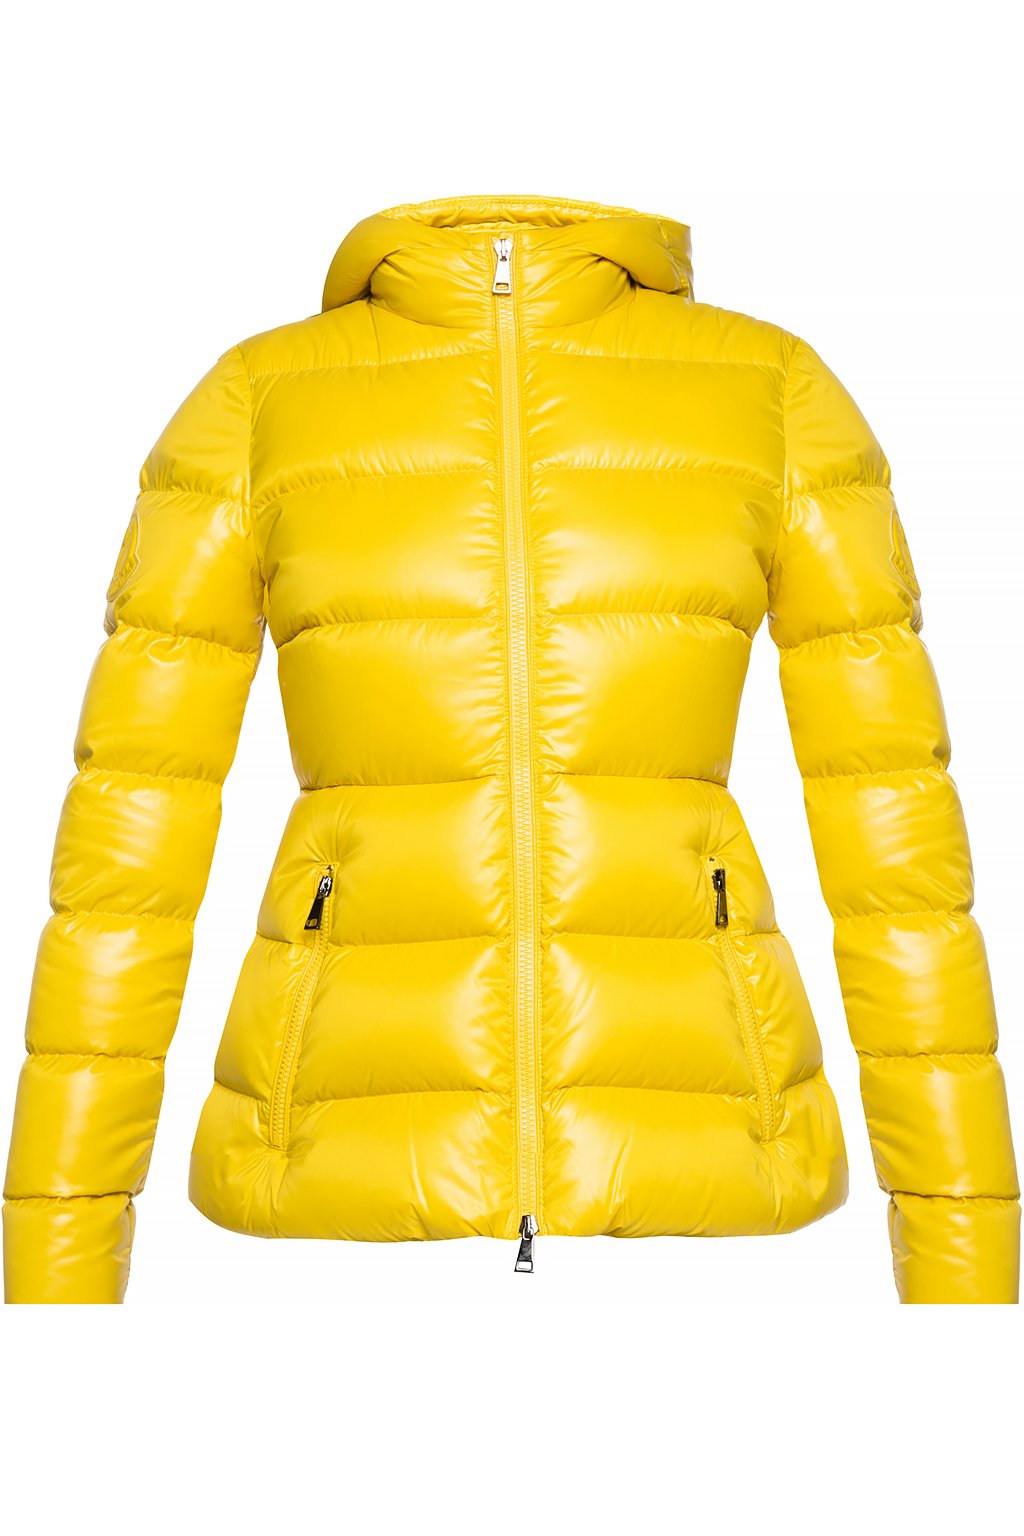 Moncler ‘Rhin’ quilted down jacket with logo | Women's Clothing | Vitkac